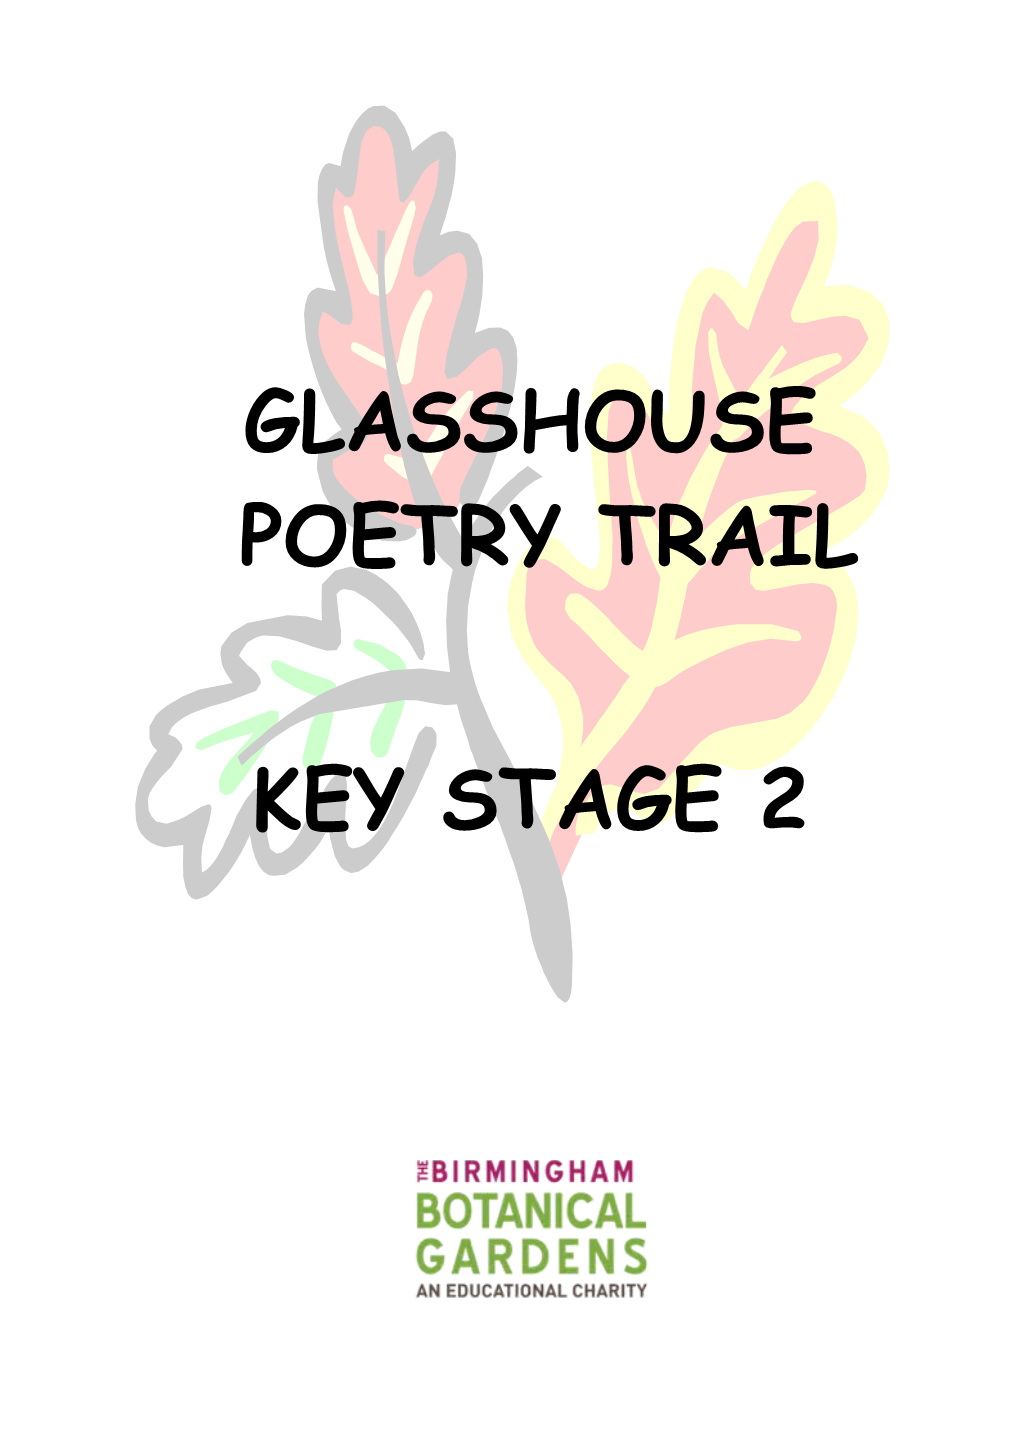 Glasshouse Poetry Trail